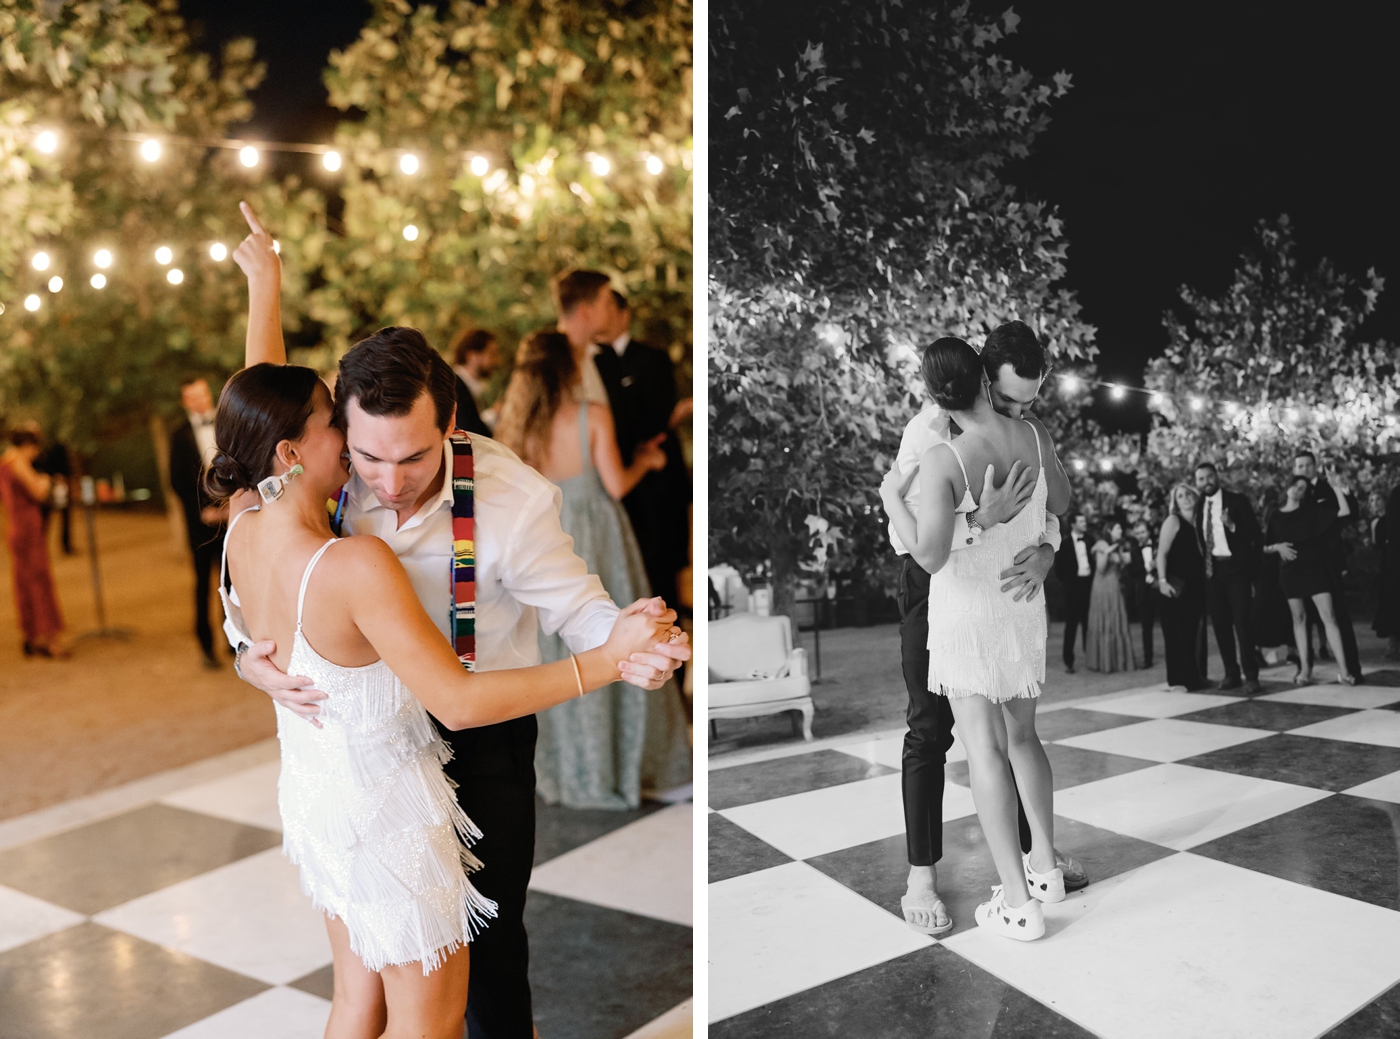 Couple embracing at their private last dance at their Austin wedding